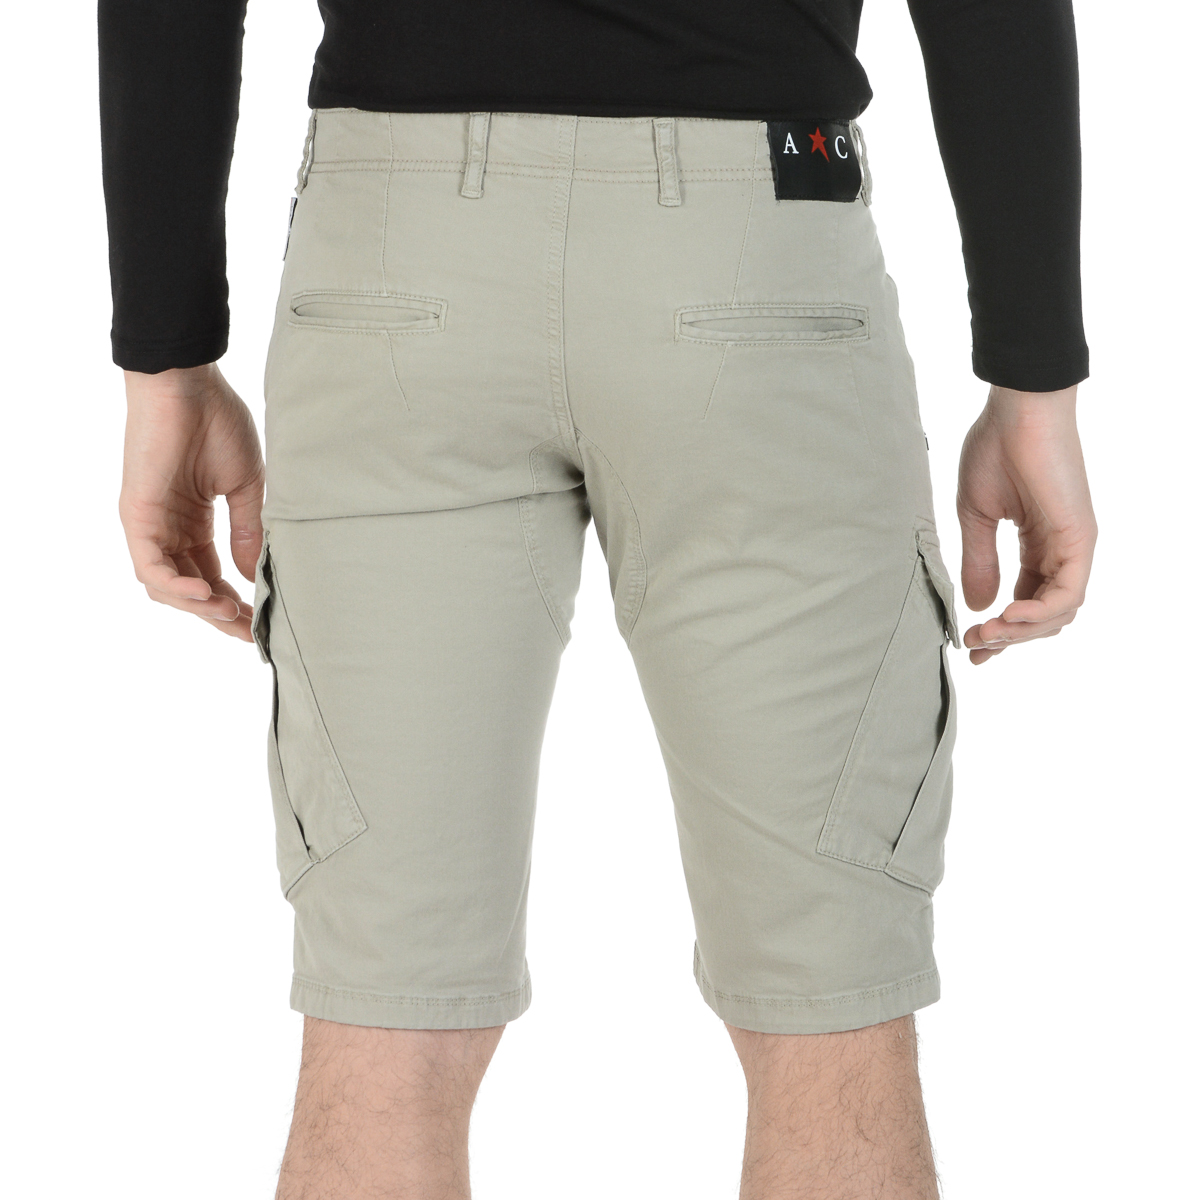 Andrew Charles Mens Shorts Taupe JAKO